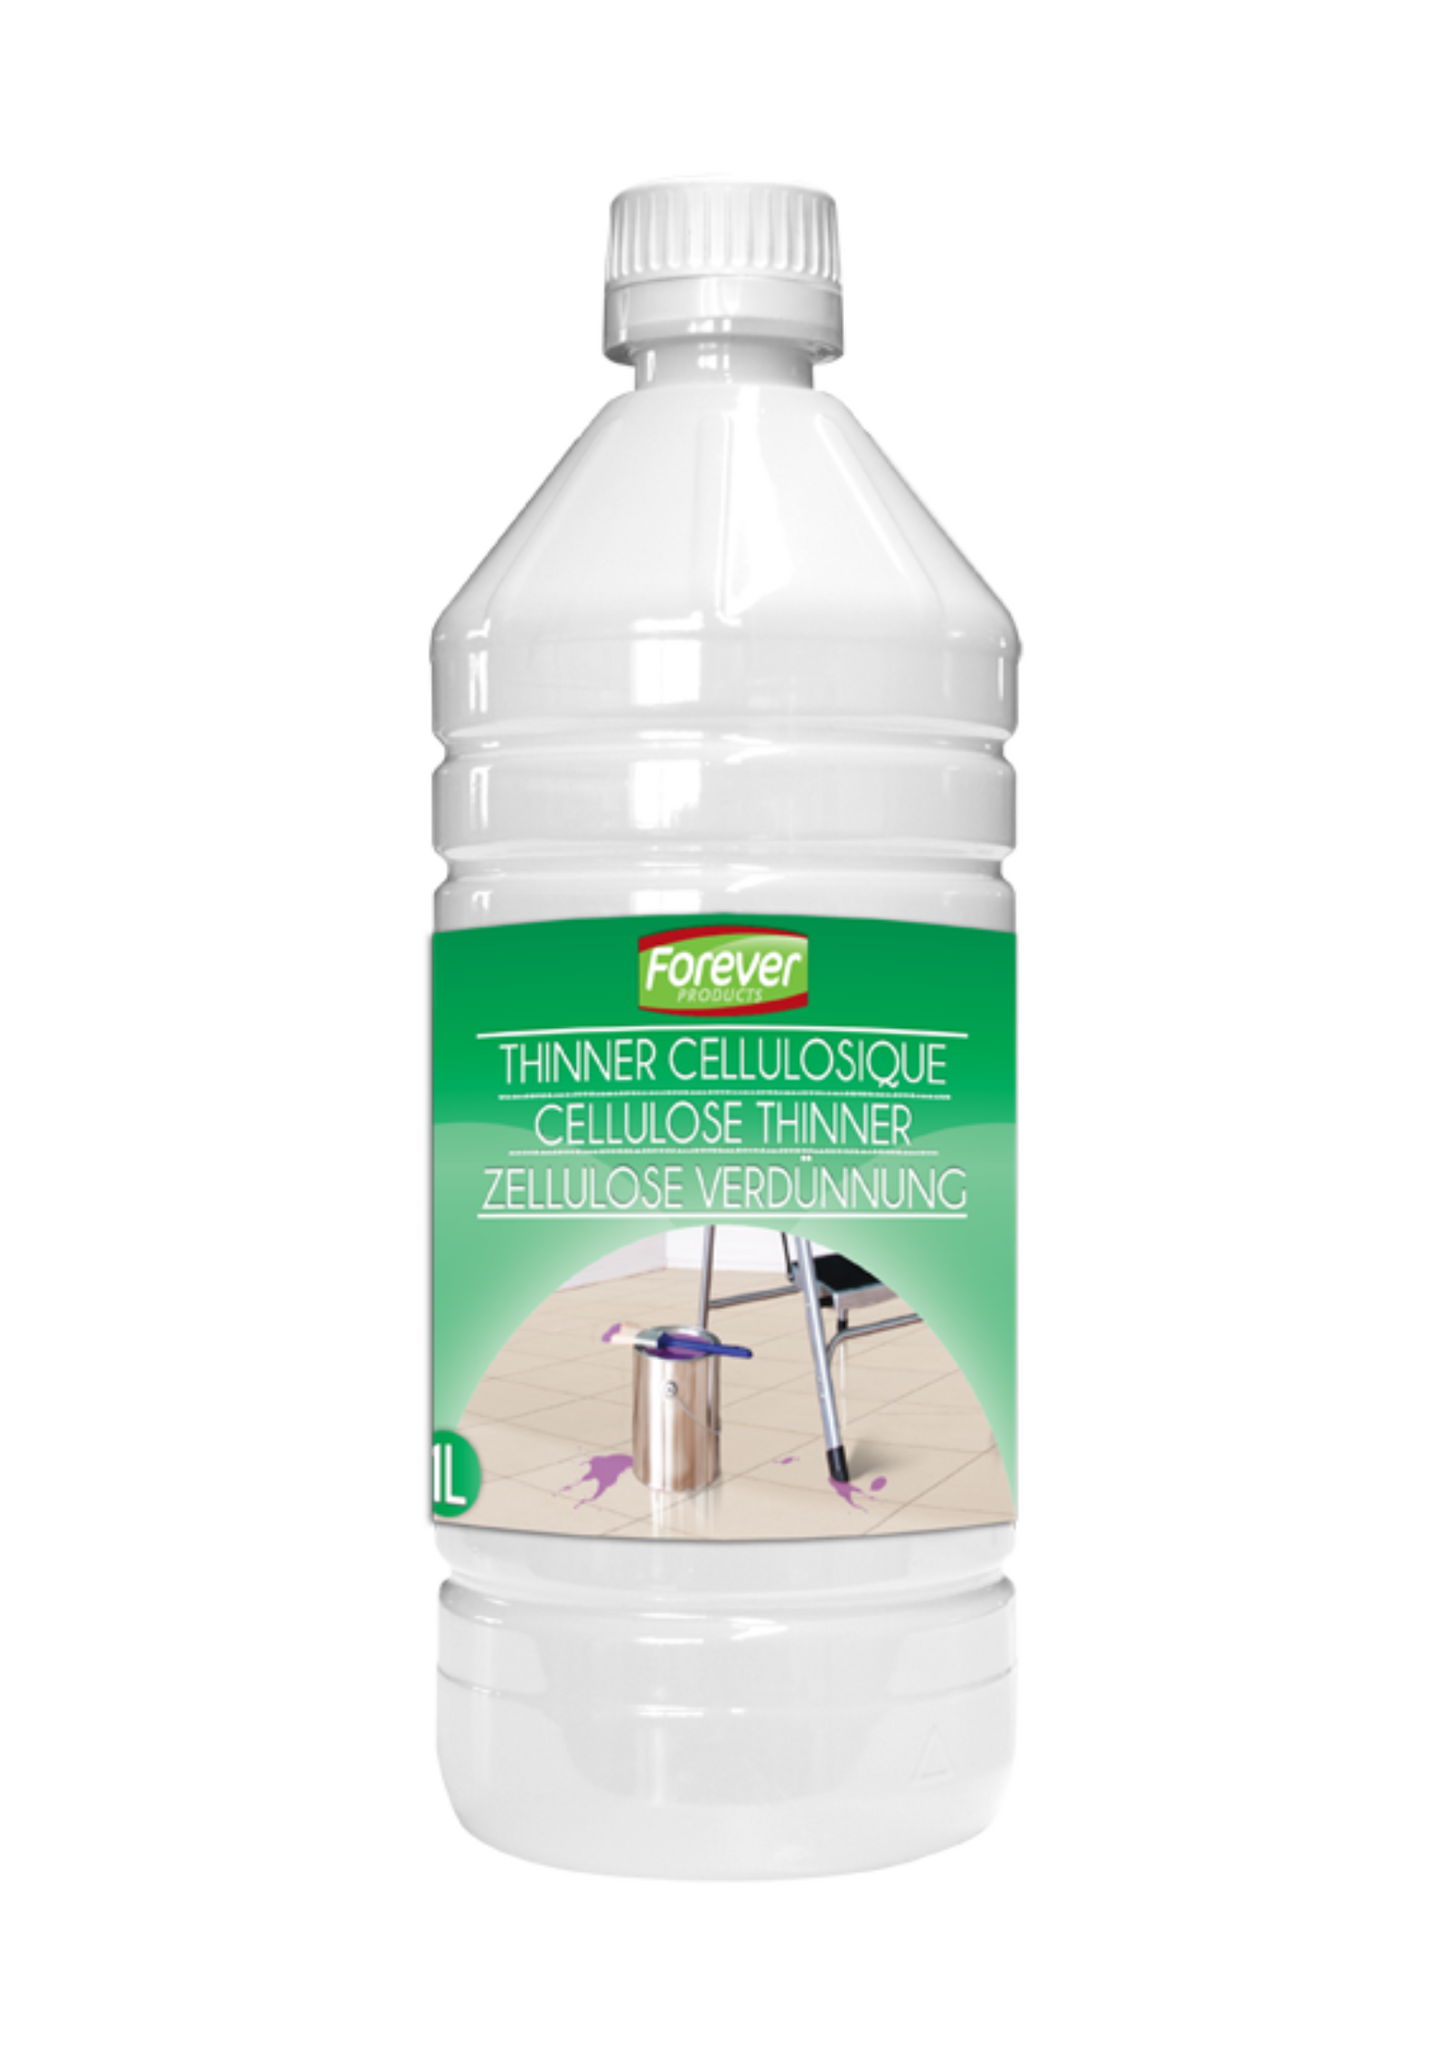 FOREVER - THINNER CELLULOSIQUE 1L